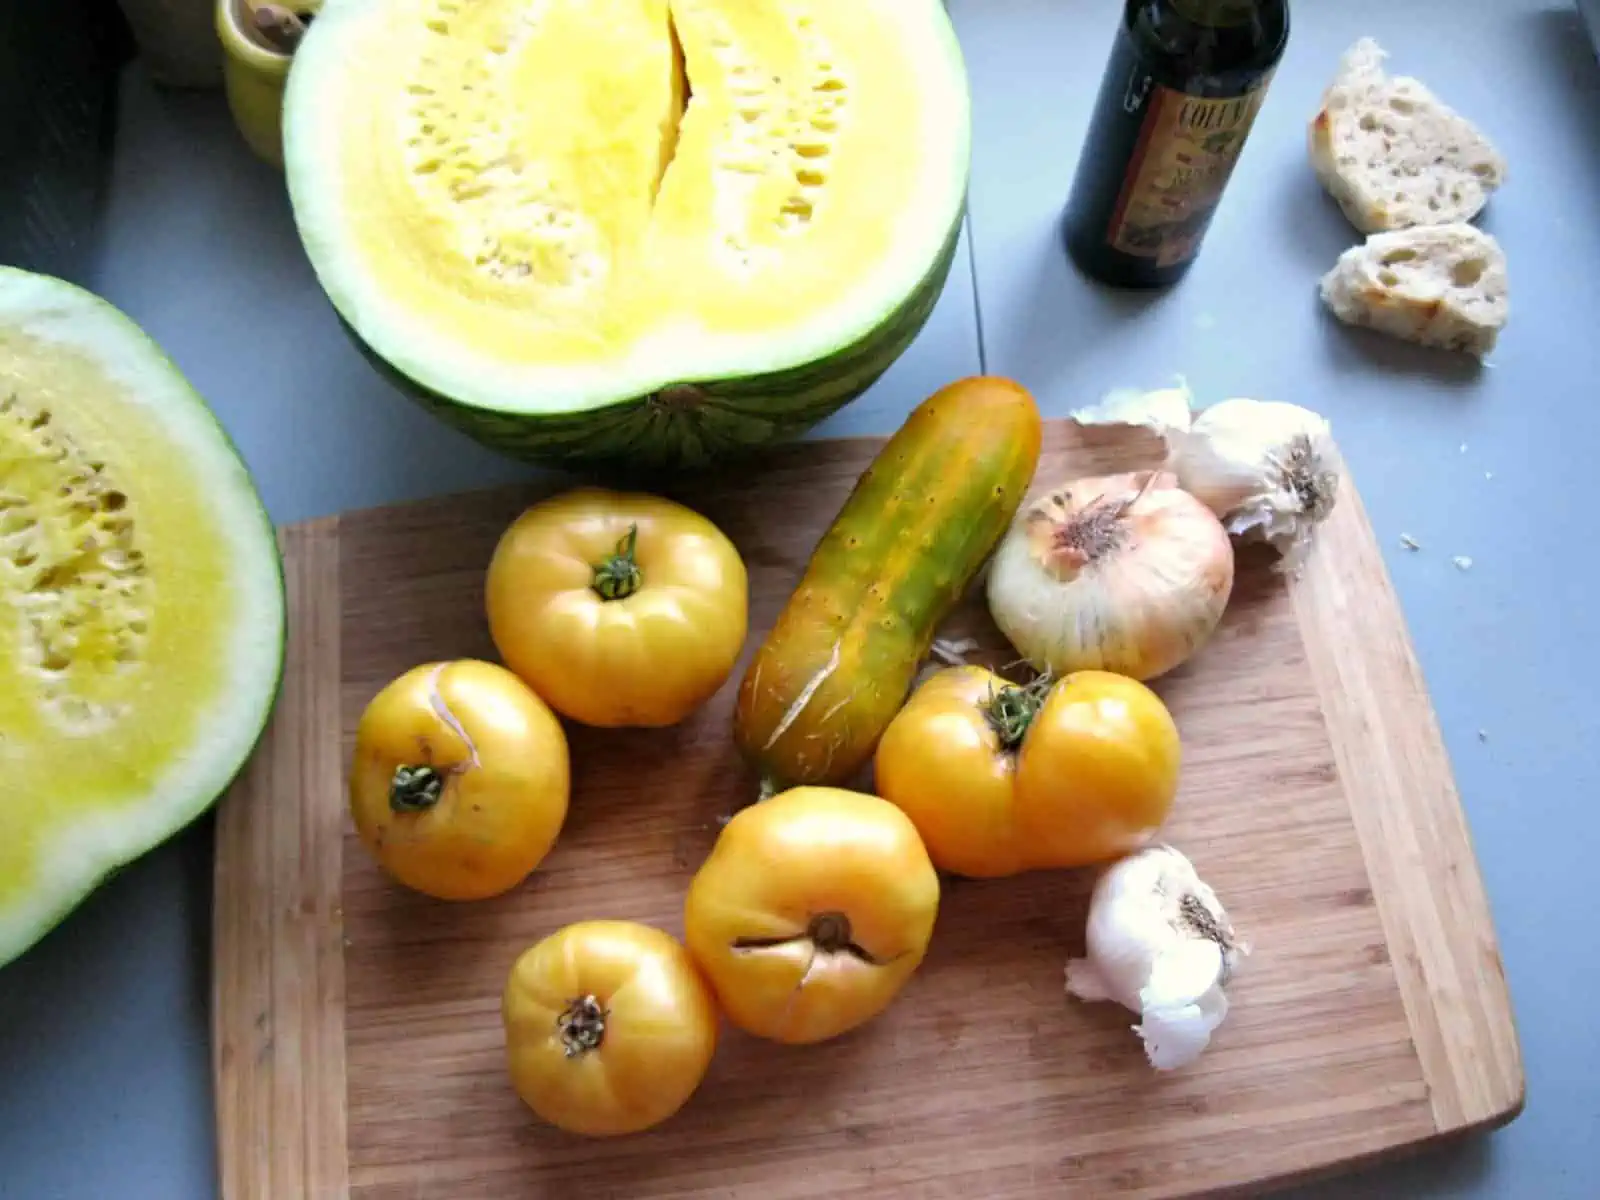 Yellow tomatoes, onions, and yellow watermelon on a cutting board.